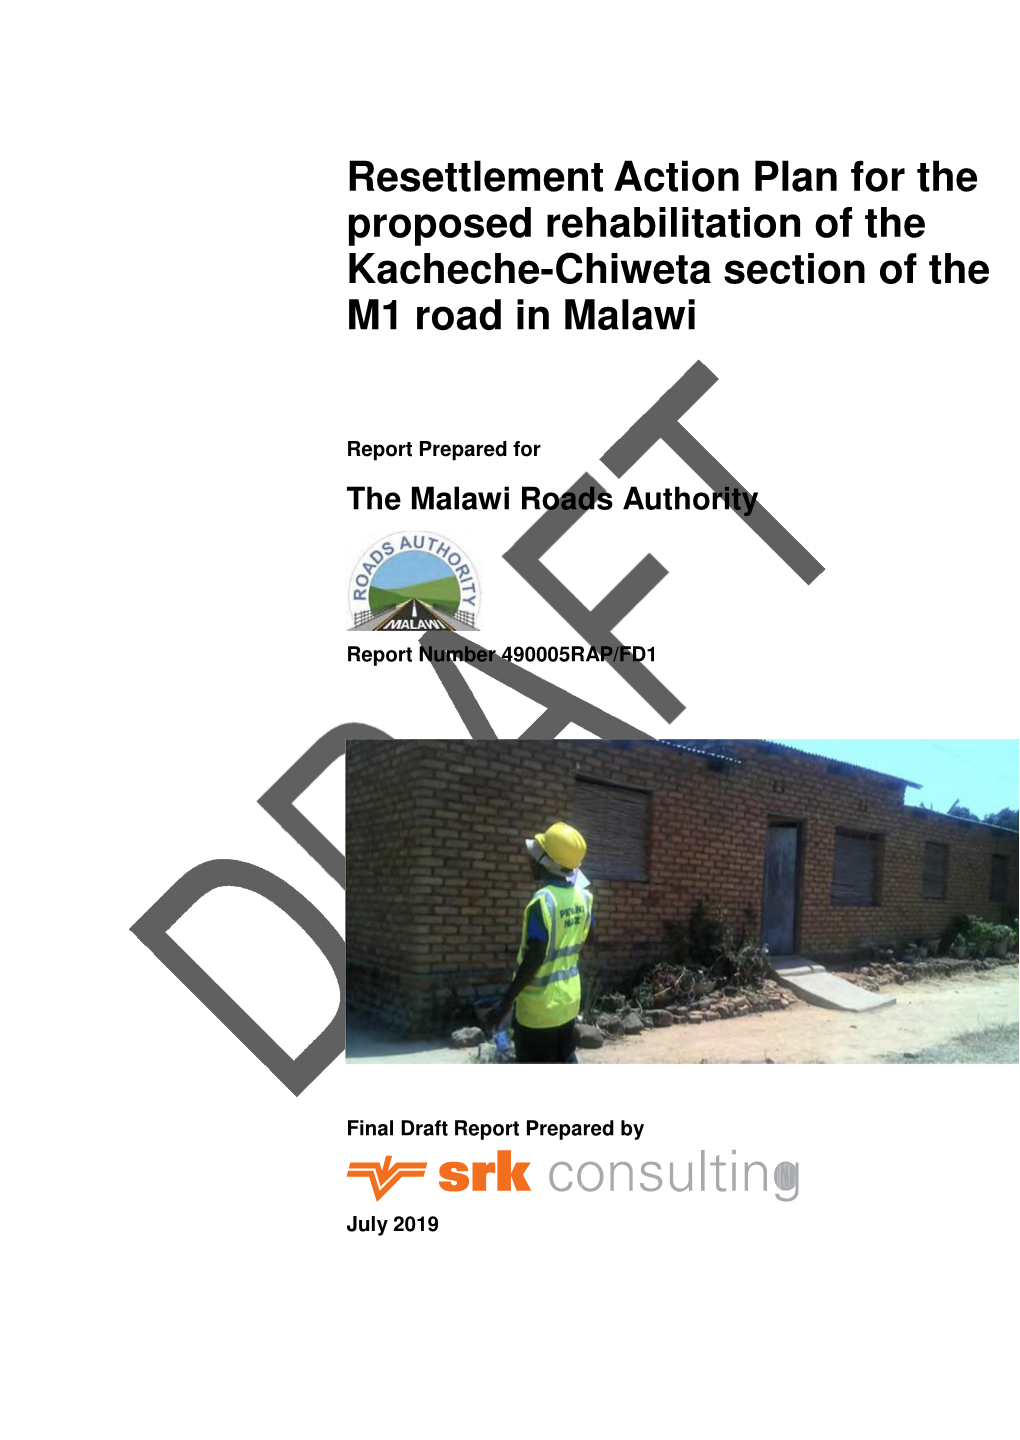 Resettlement Action Plan for the Proposed Rehabilitation of the Kacheche-Chiweta Section of the M1 Road in Malawi